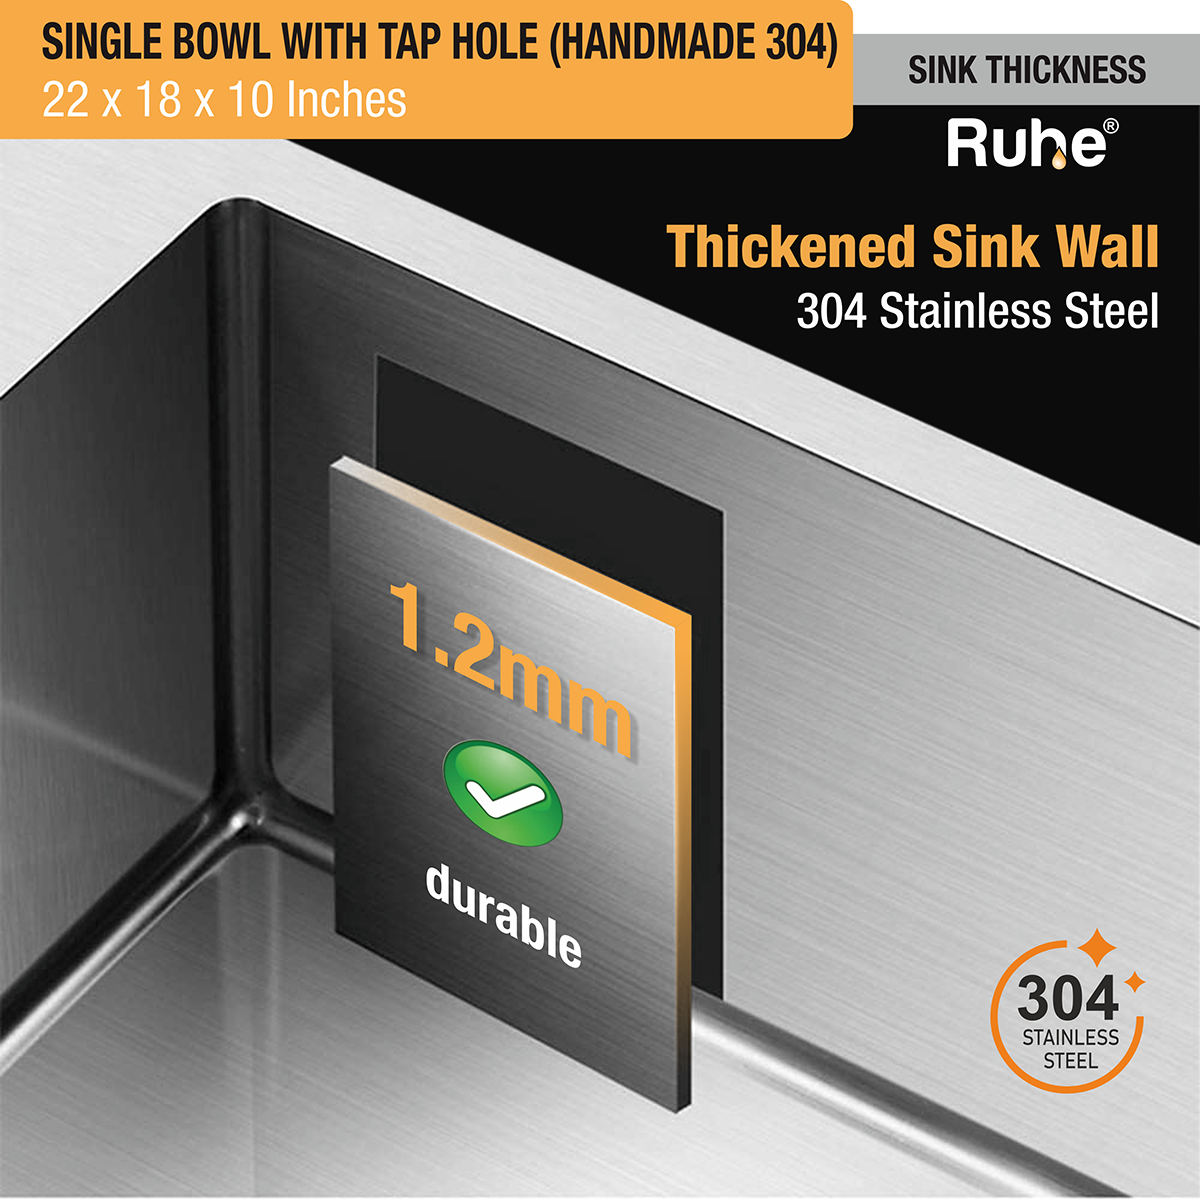 Handmade Single Bowl 304-Grade Kitchen Sink (22 x 18 x 10 Inches) with Tap Hole stainless steel thickness